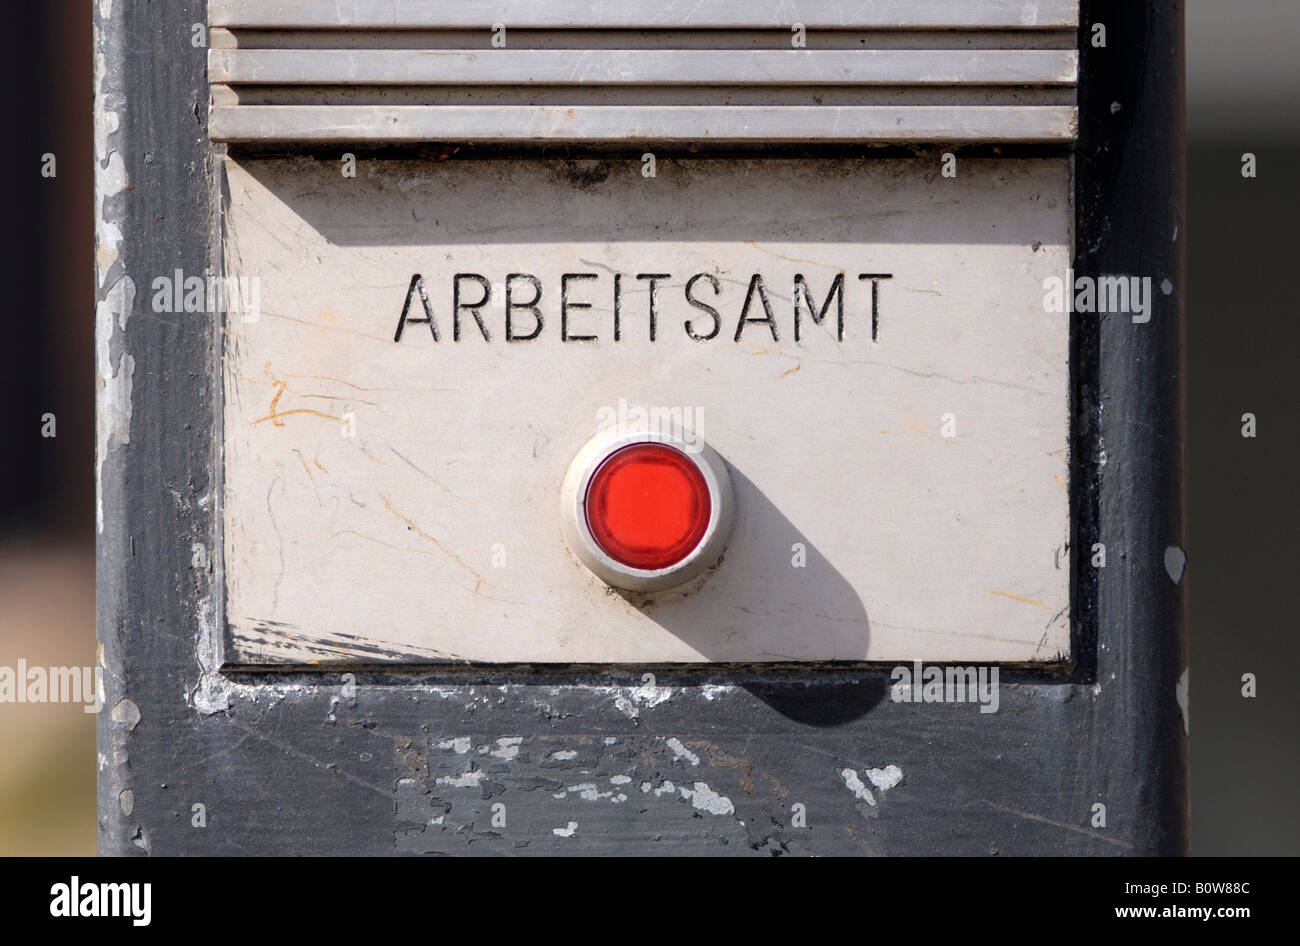 Red doorbell button, 'Arbeitsamt' (employment agency) in writing Stock Photo